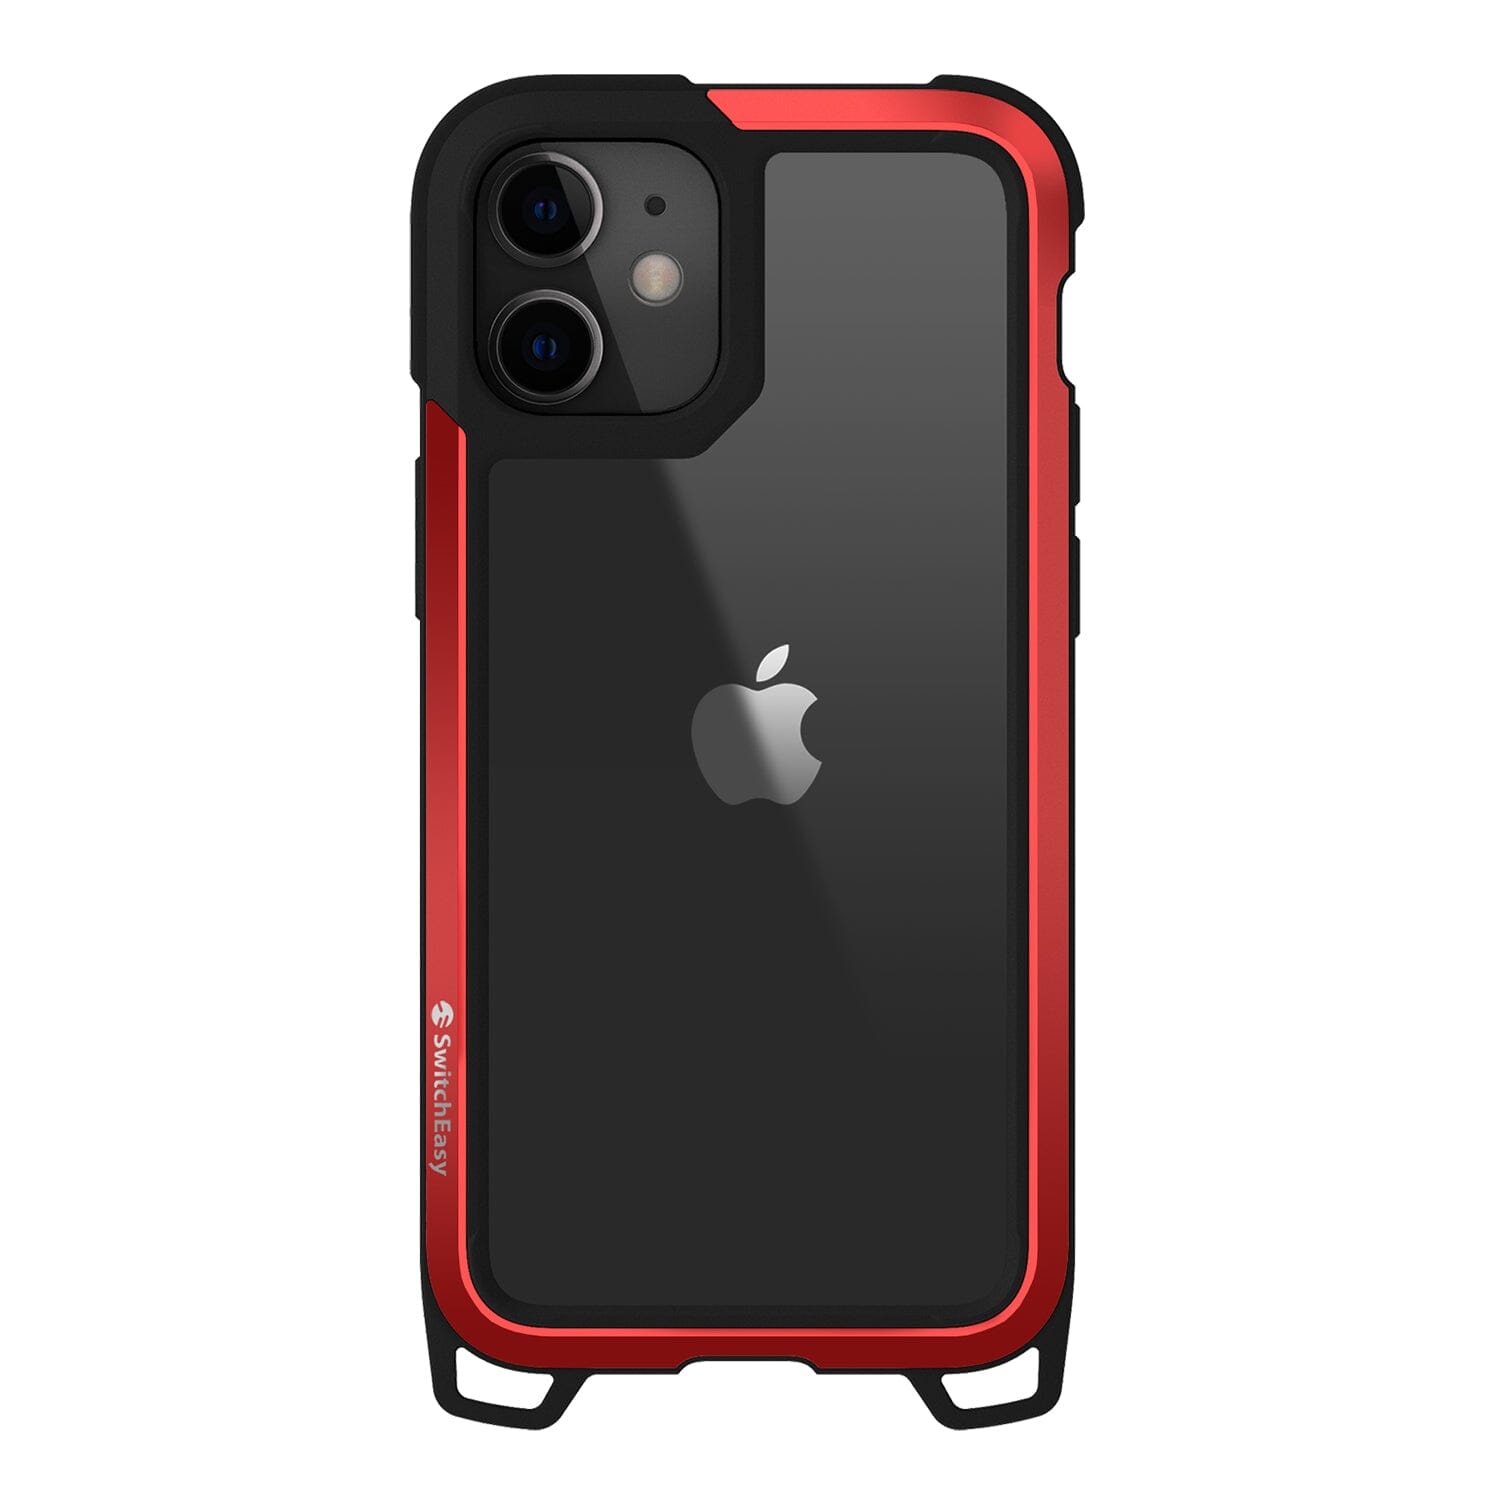 SwitchEasy Odyssey Case for iPhone 12 Series iPhone 12 Series SwitchEasy Red iPhone 12 Mini 5.4" 